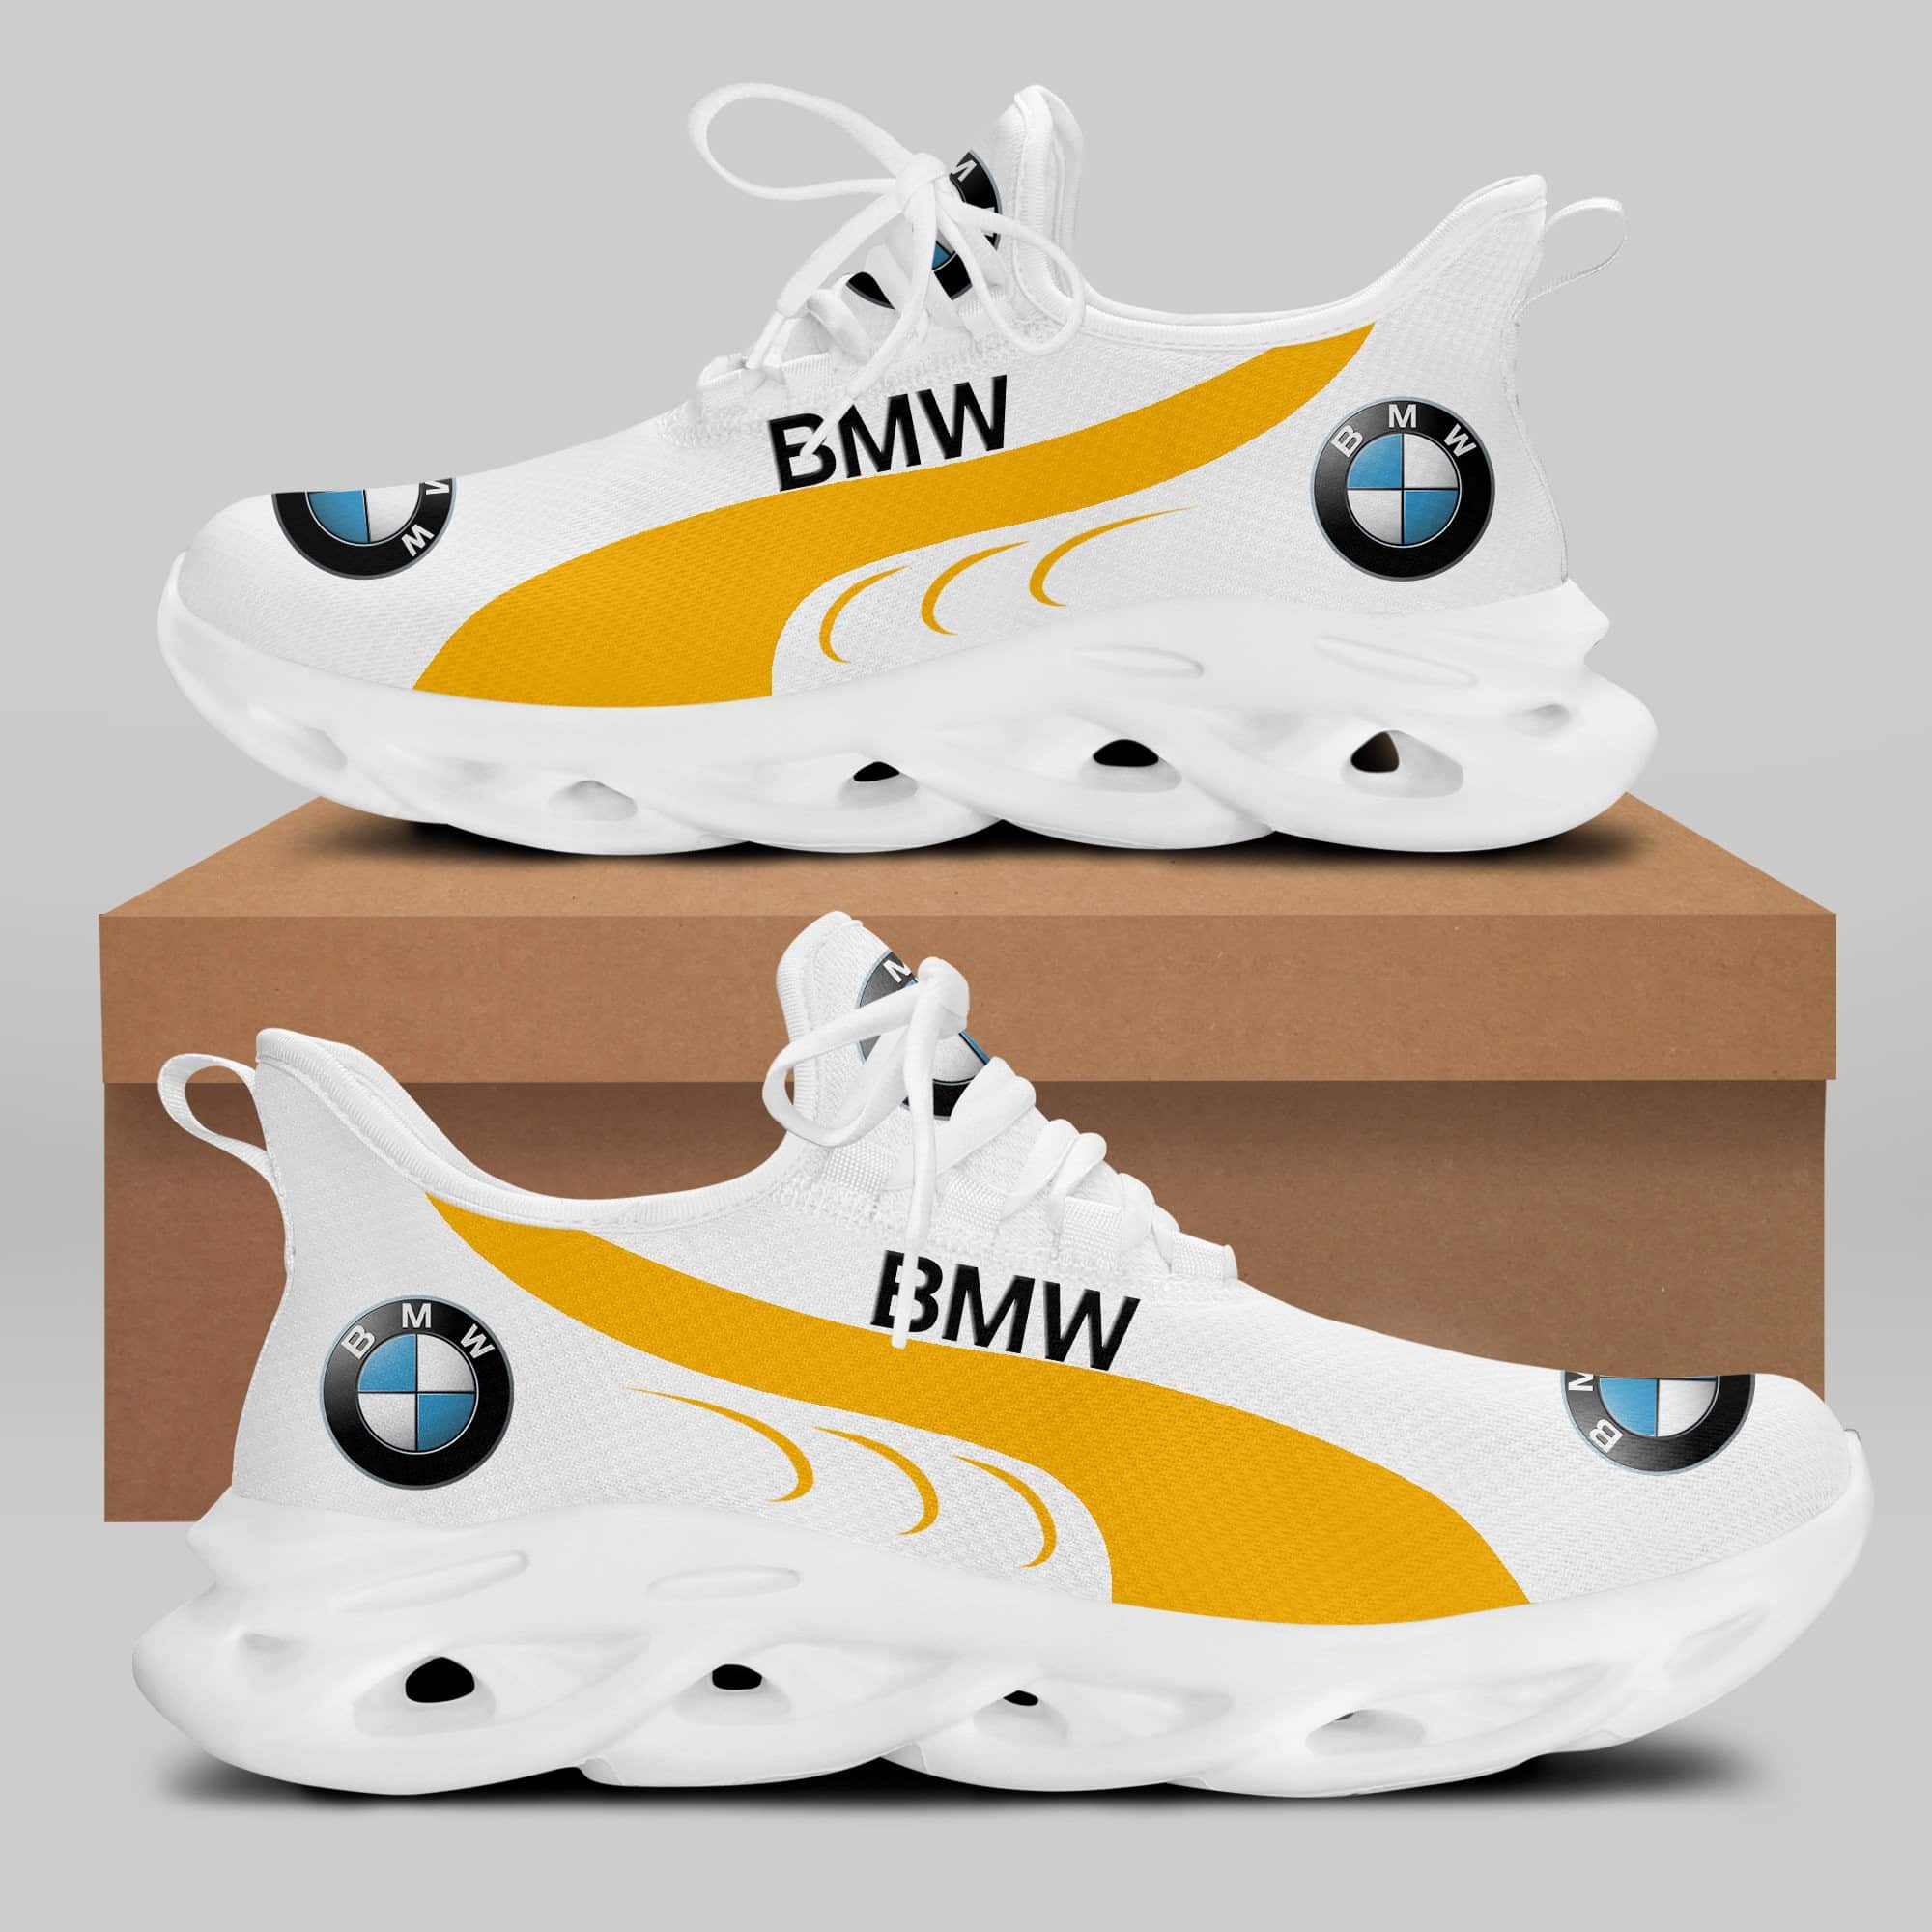 Bmw Running Shoes Max Soul Shoes Sneakers Ver 56 1